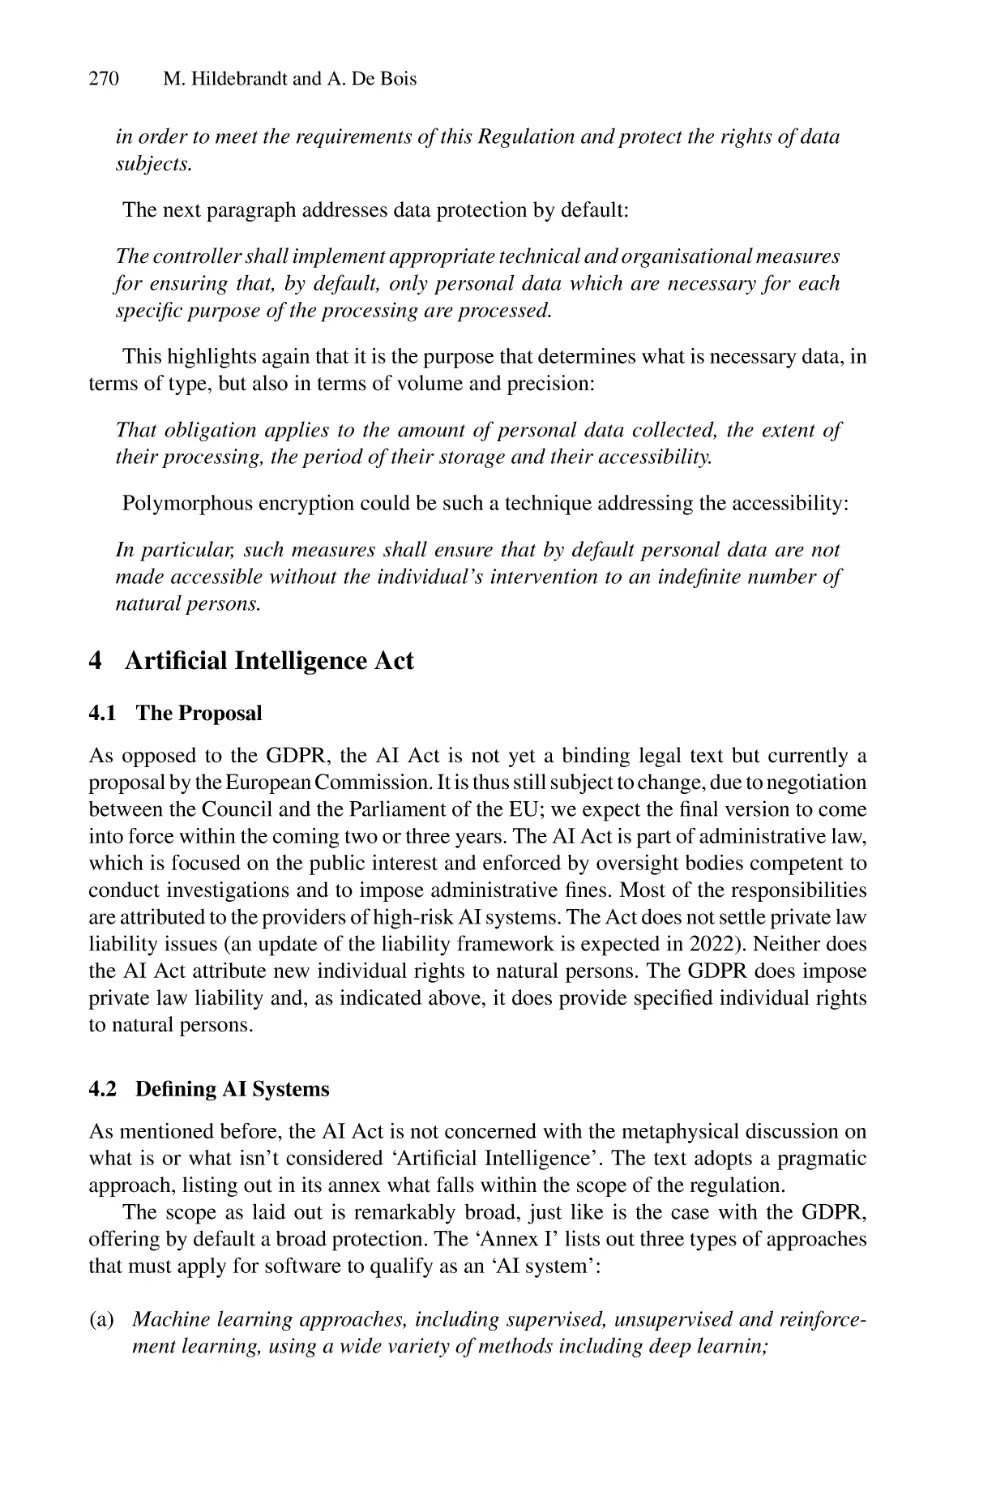 4 Artificial Intelligence Act
4.1 The Proposal
4.2 Defining AI Systems